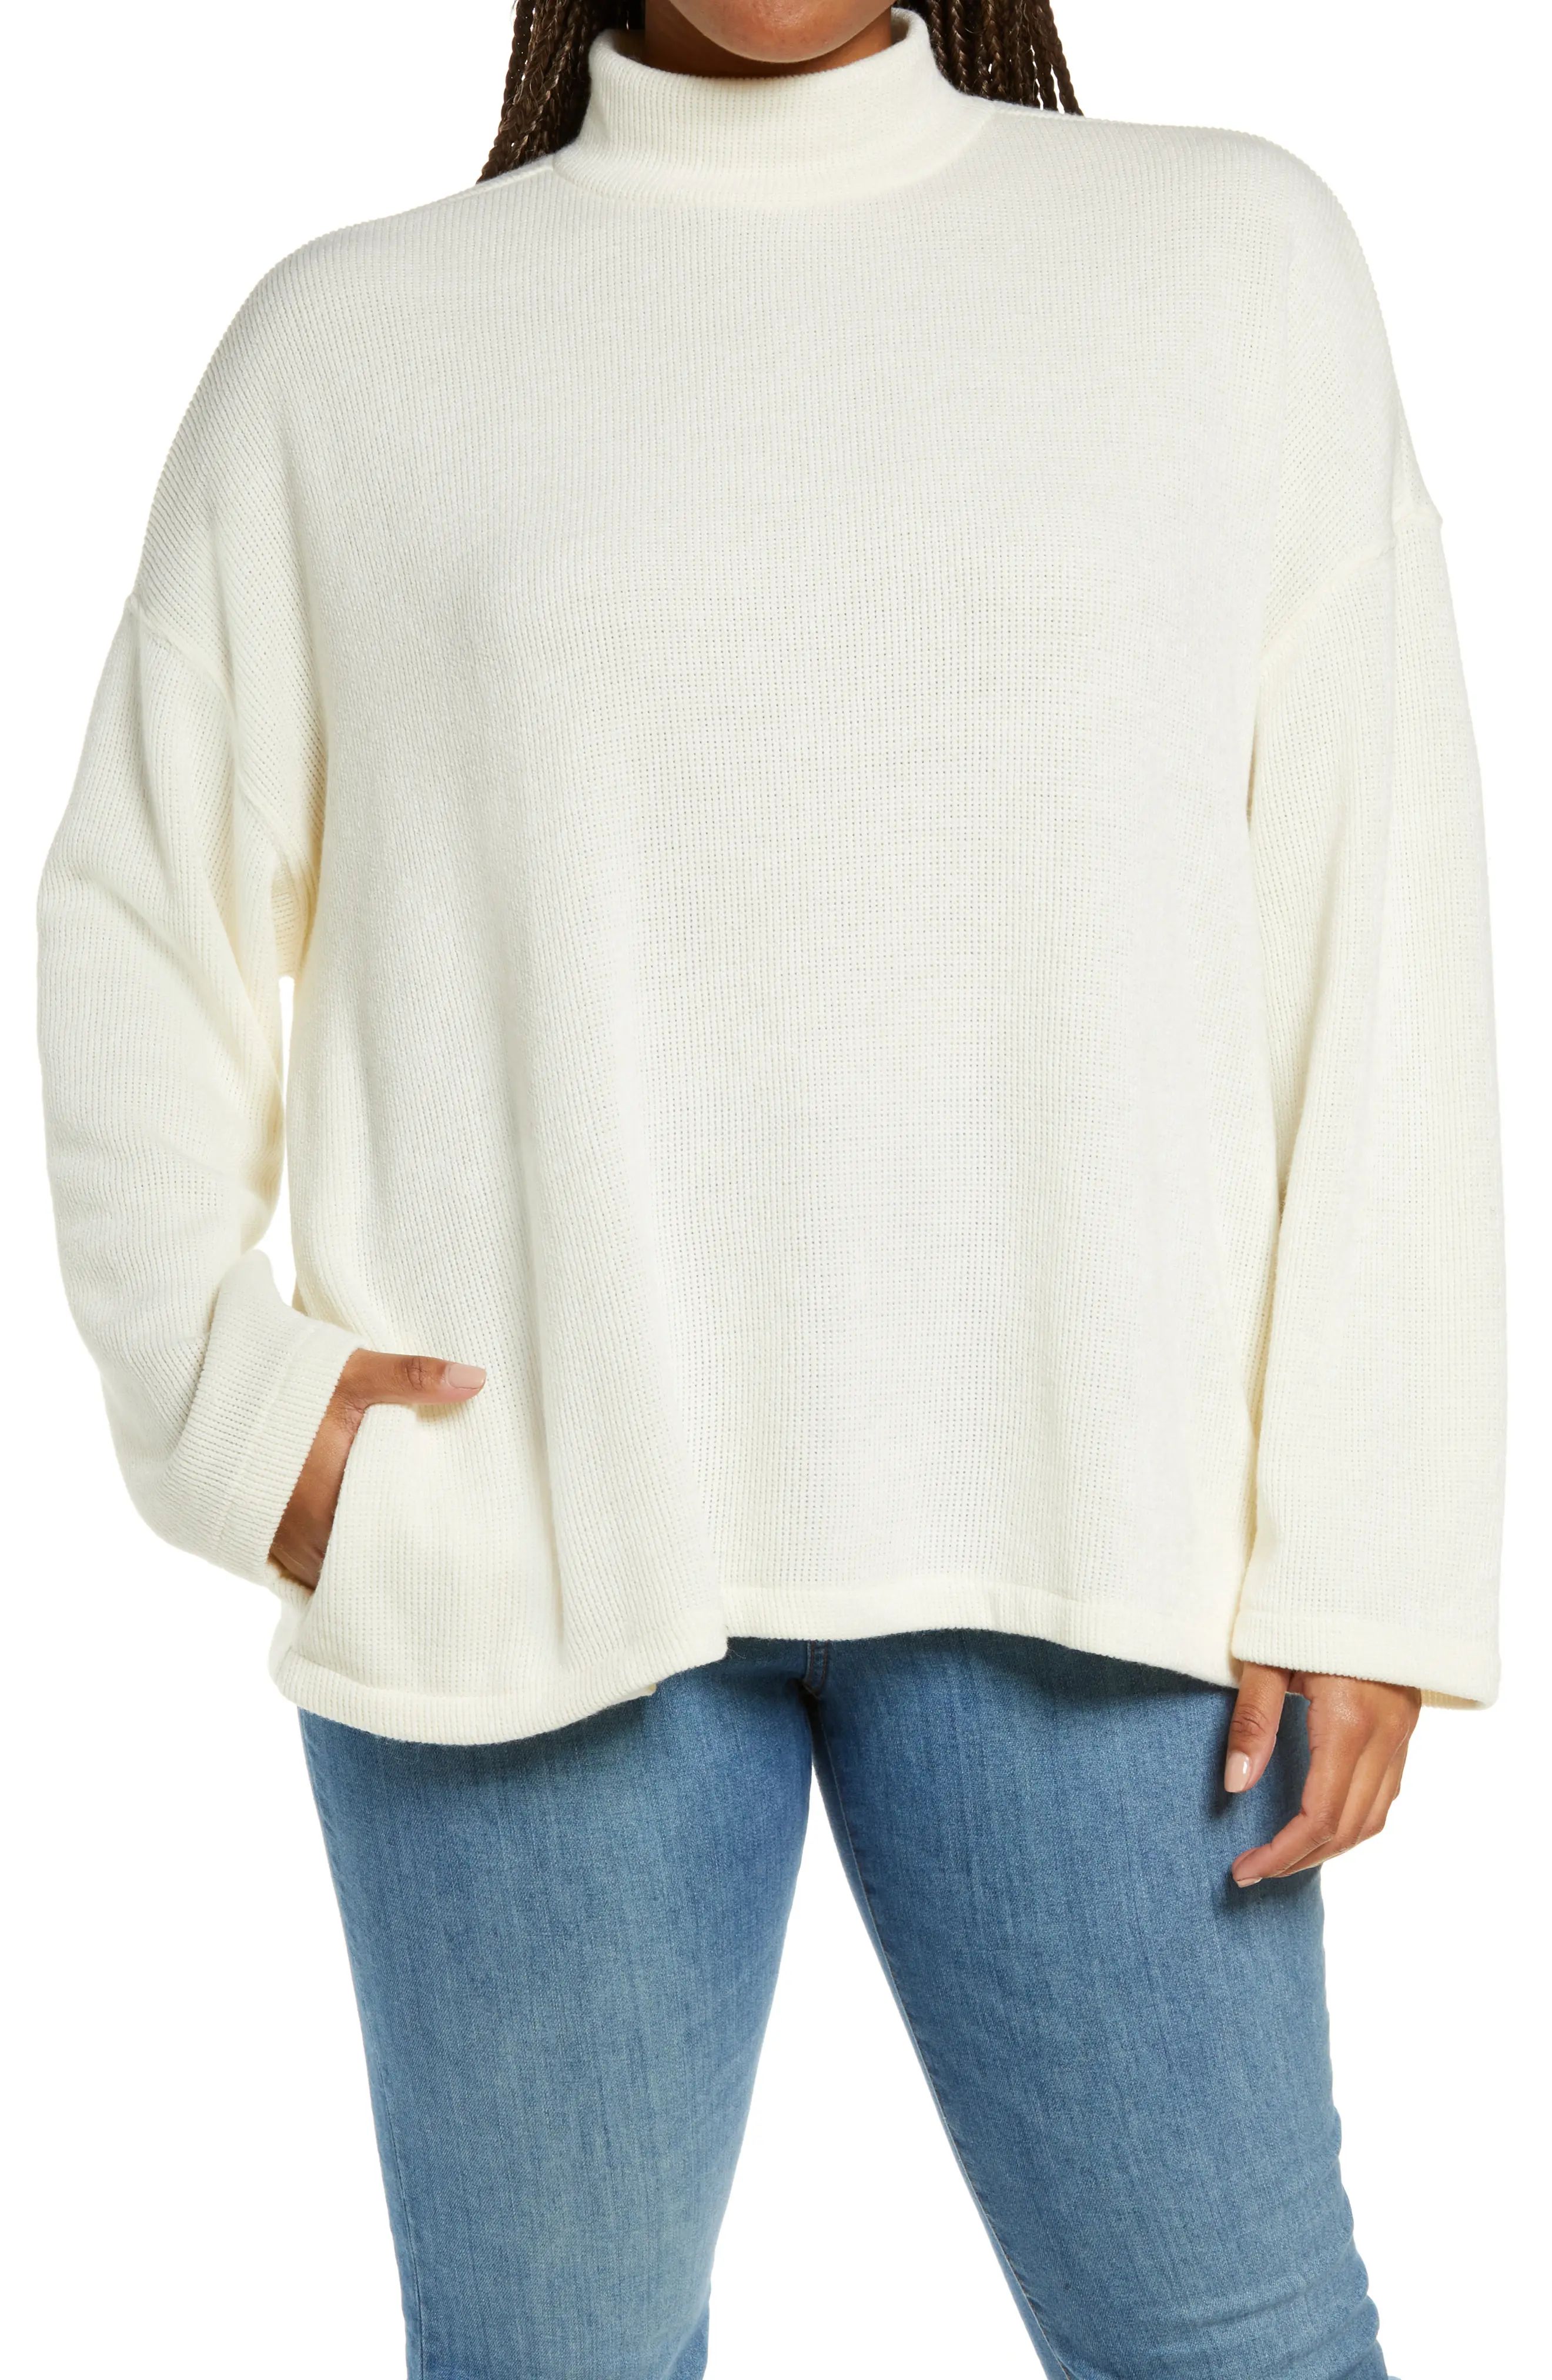 Madewell Mock Neck Button Back Top in Antique Cream at Nordstrom, Size 2X | Nordstrom